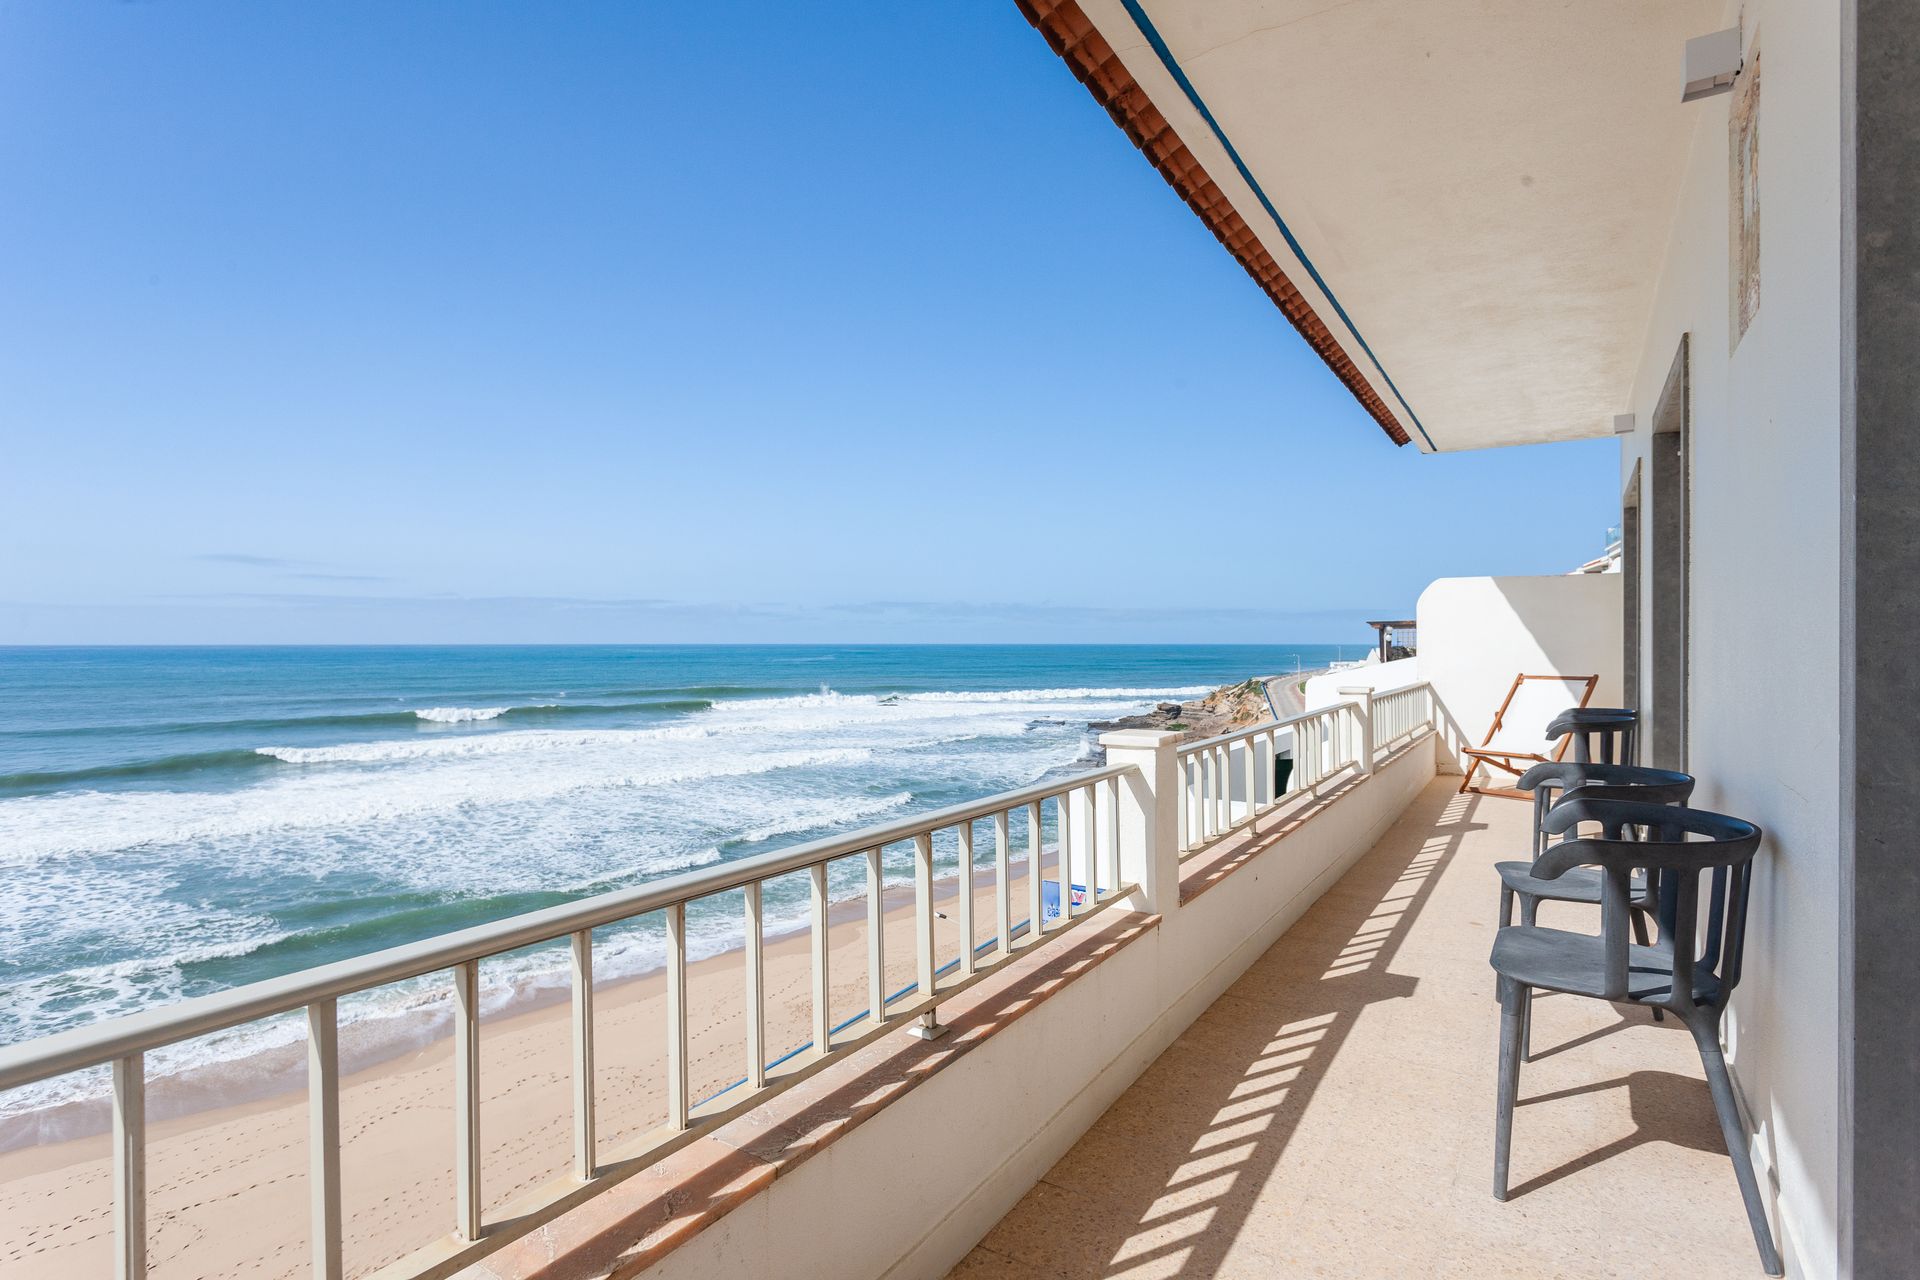 a balcony overlooking the ocean with chairs and a railing